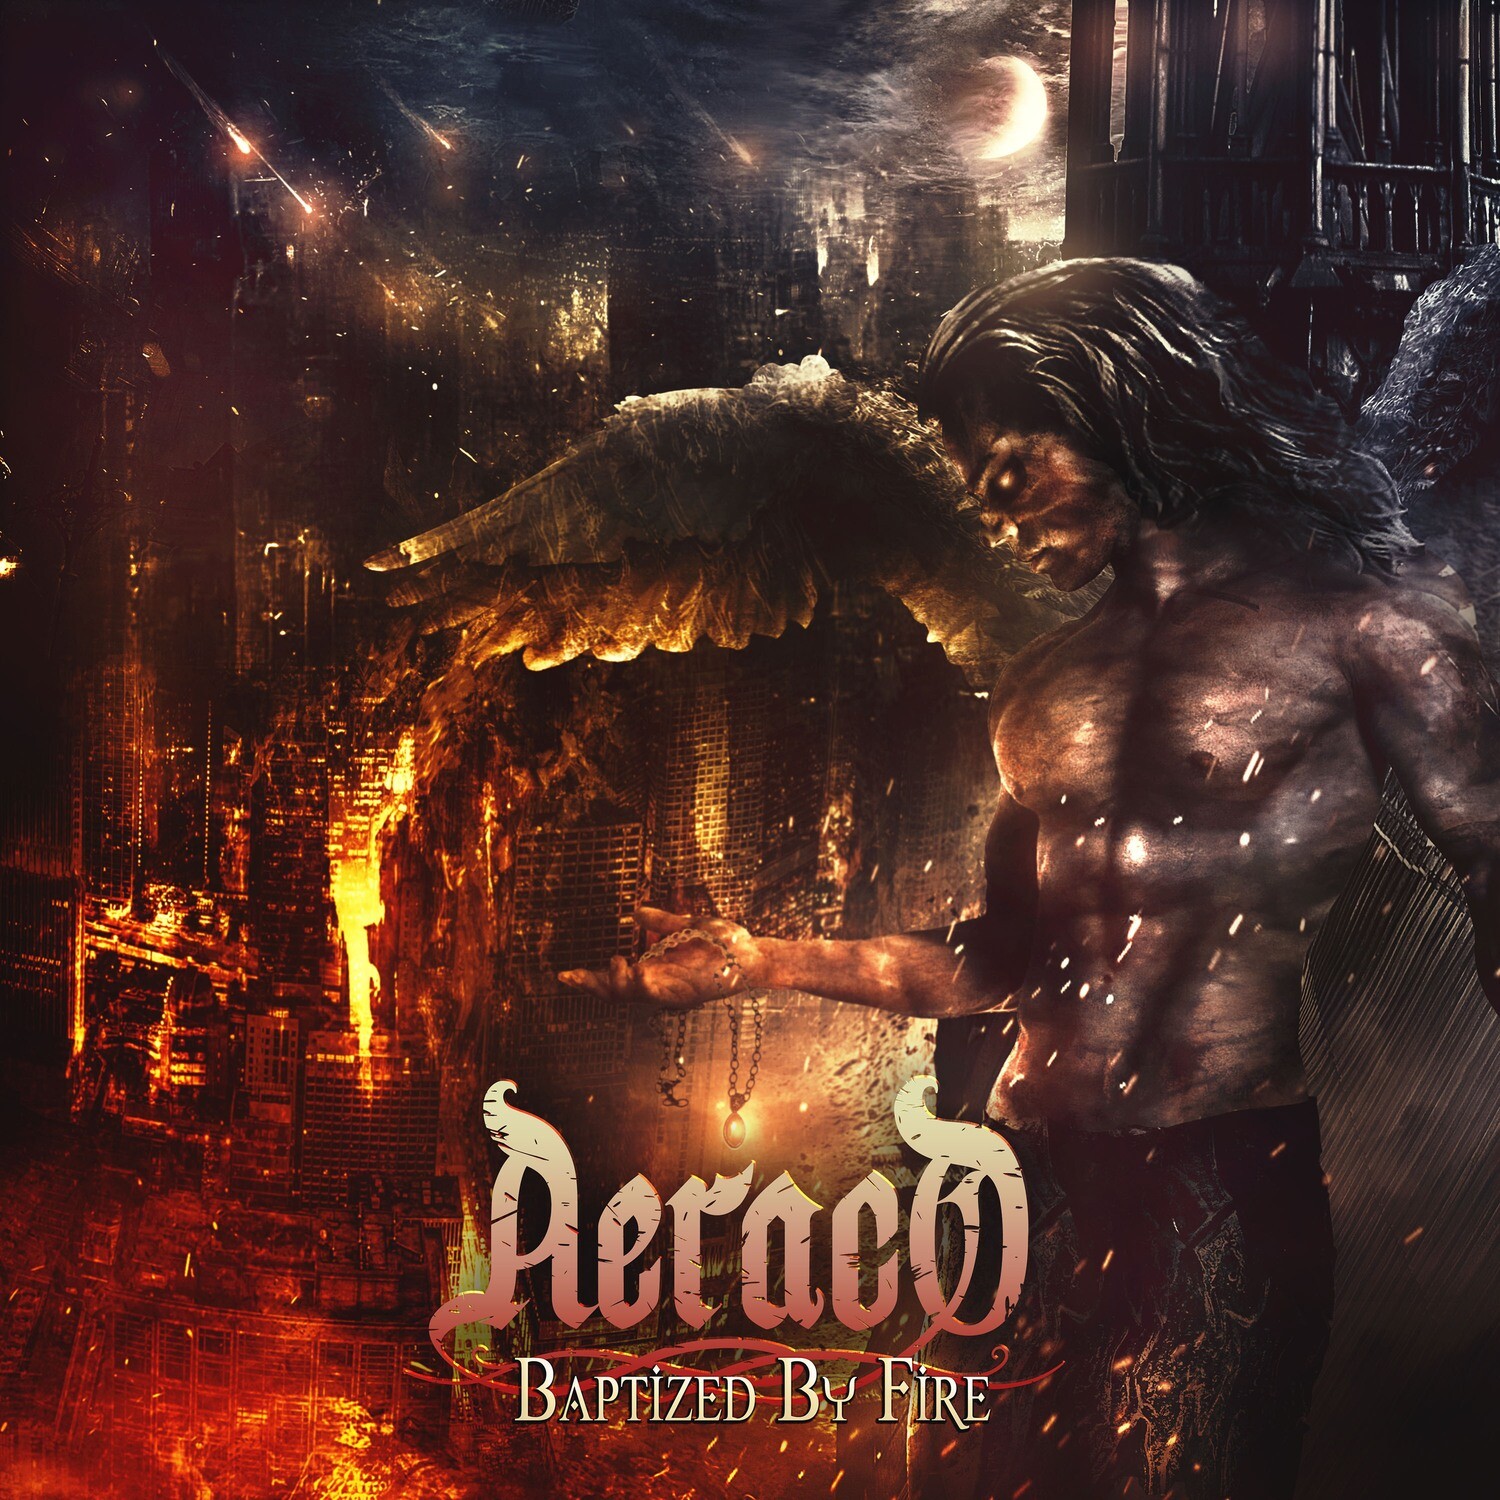 Baptized by Fire from Aeraco [CD]